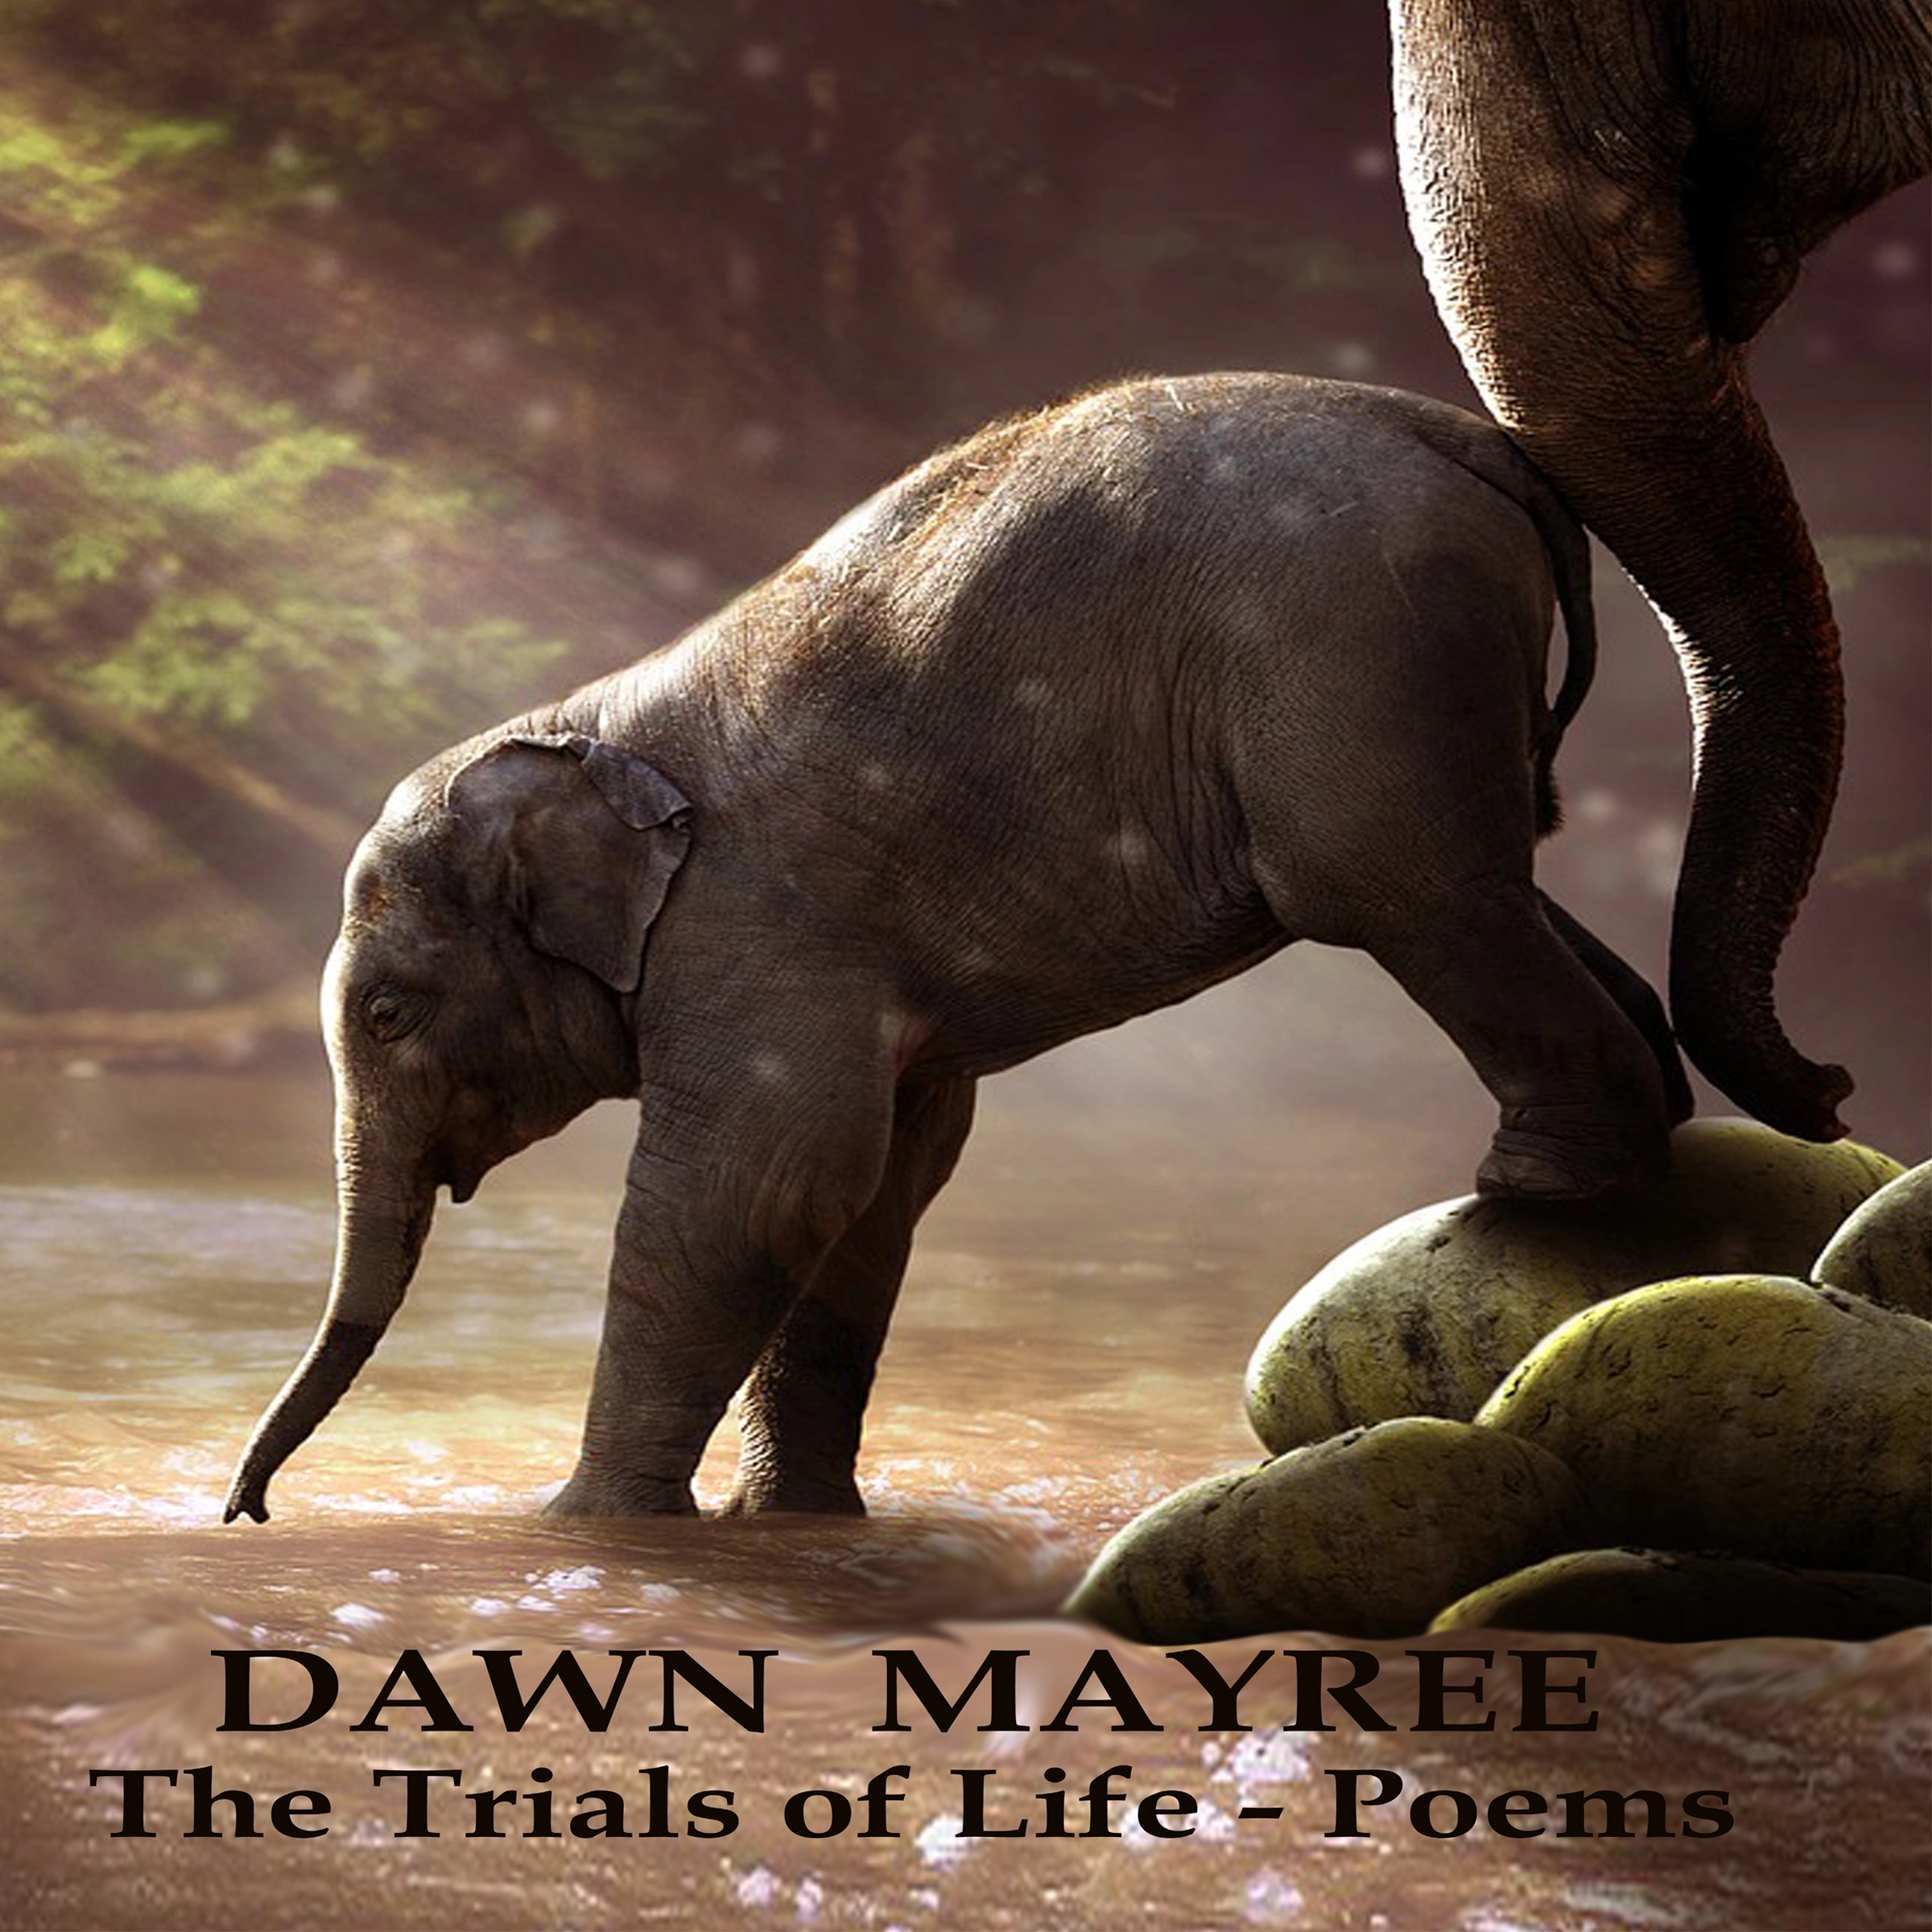 The Trials of Life - Poems Audiobook by Dawn Mayree